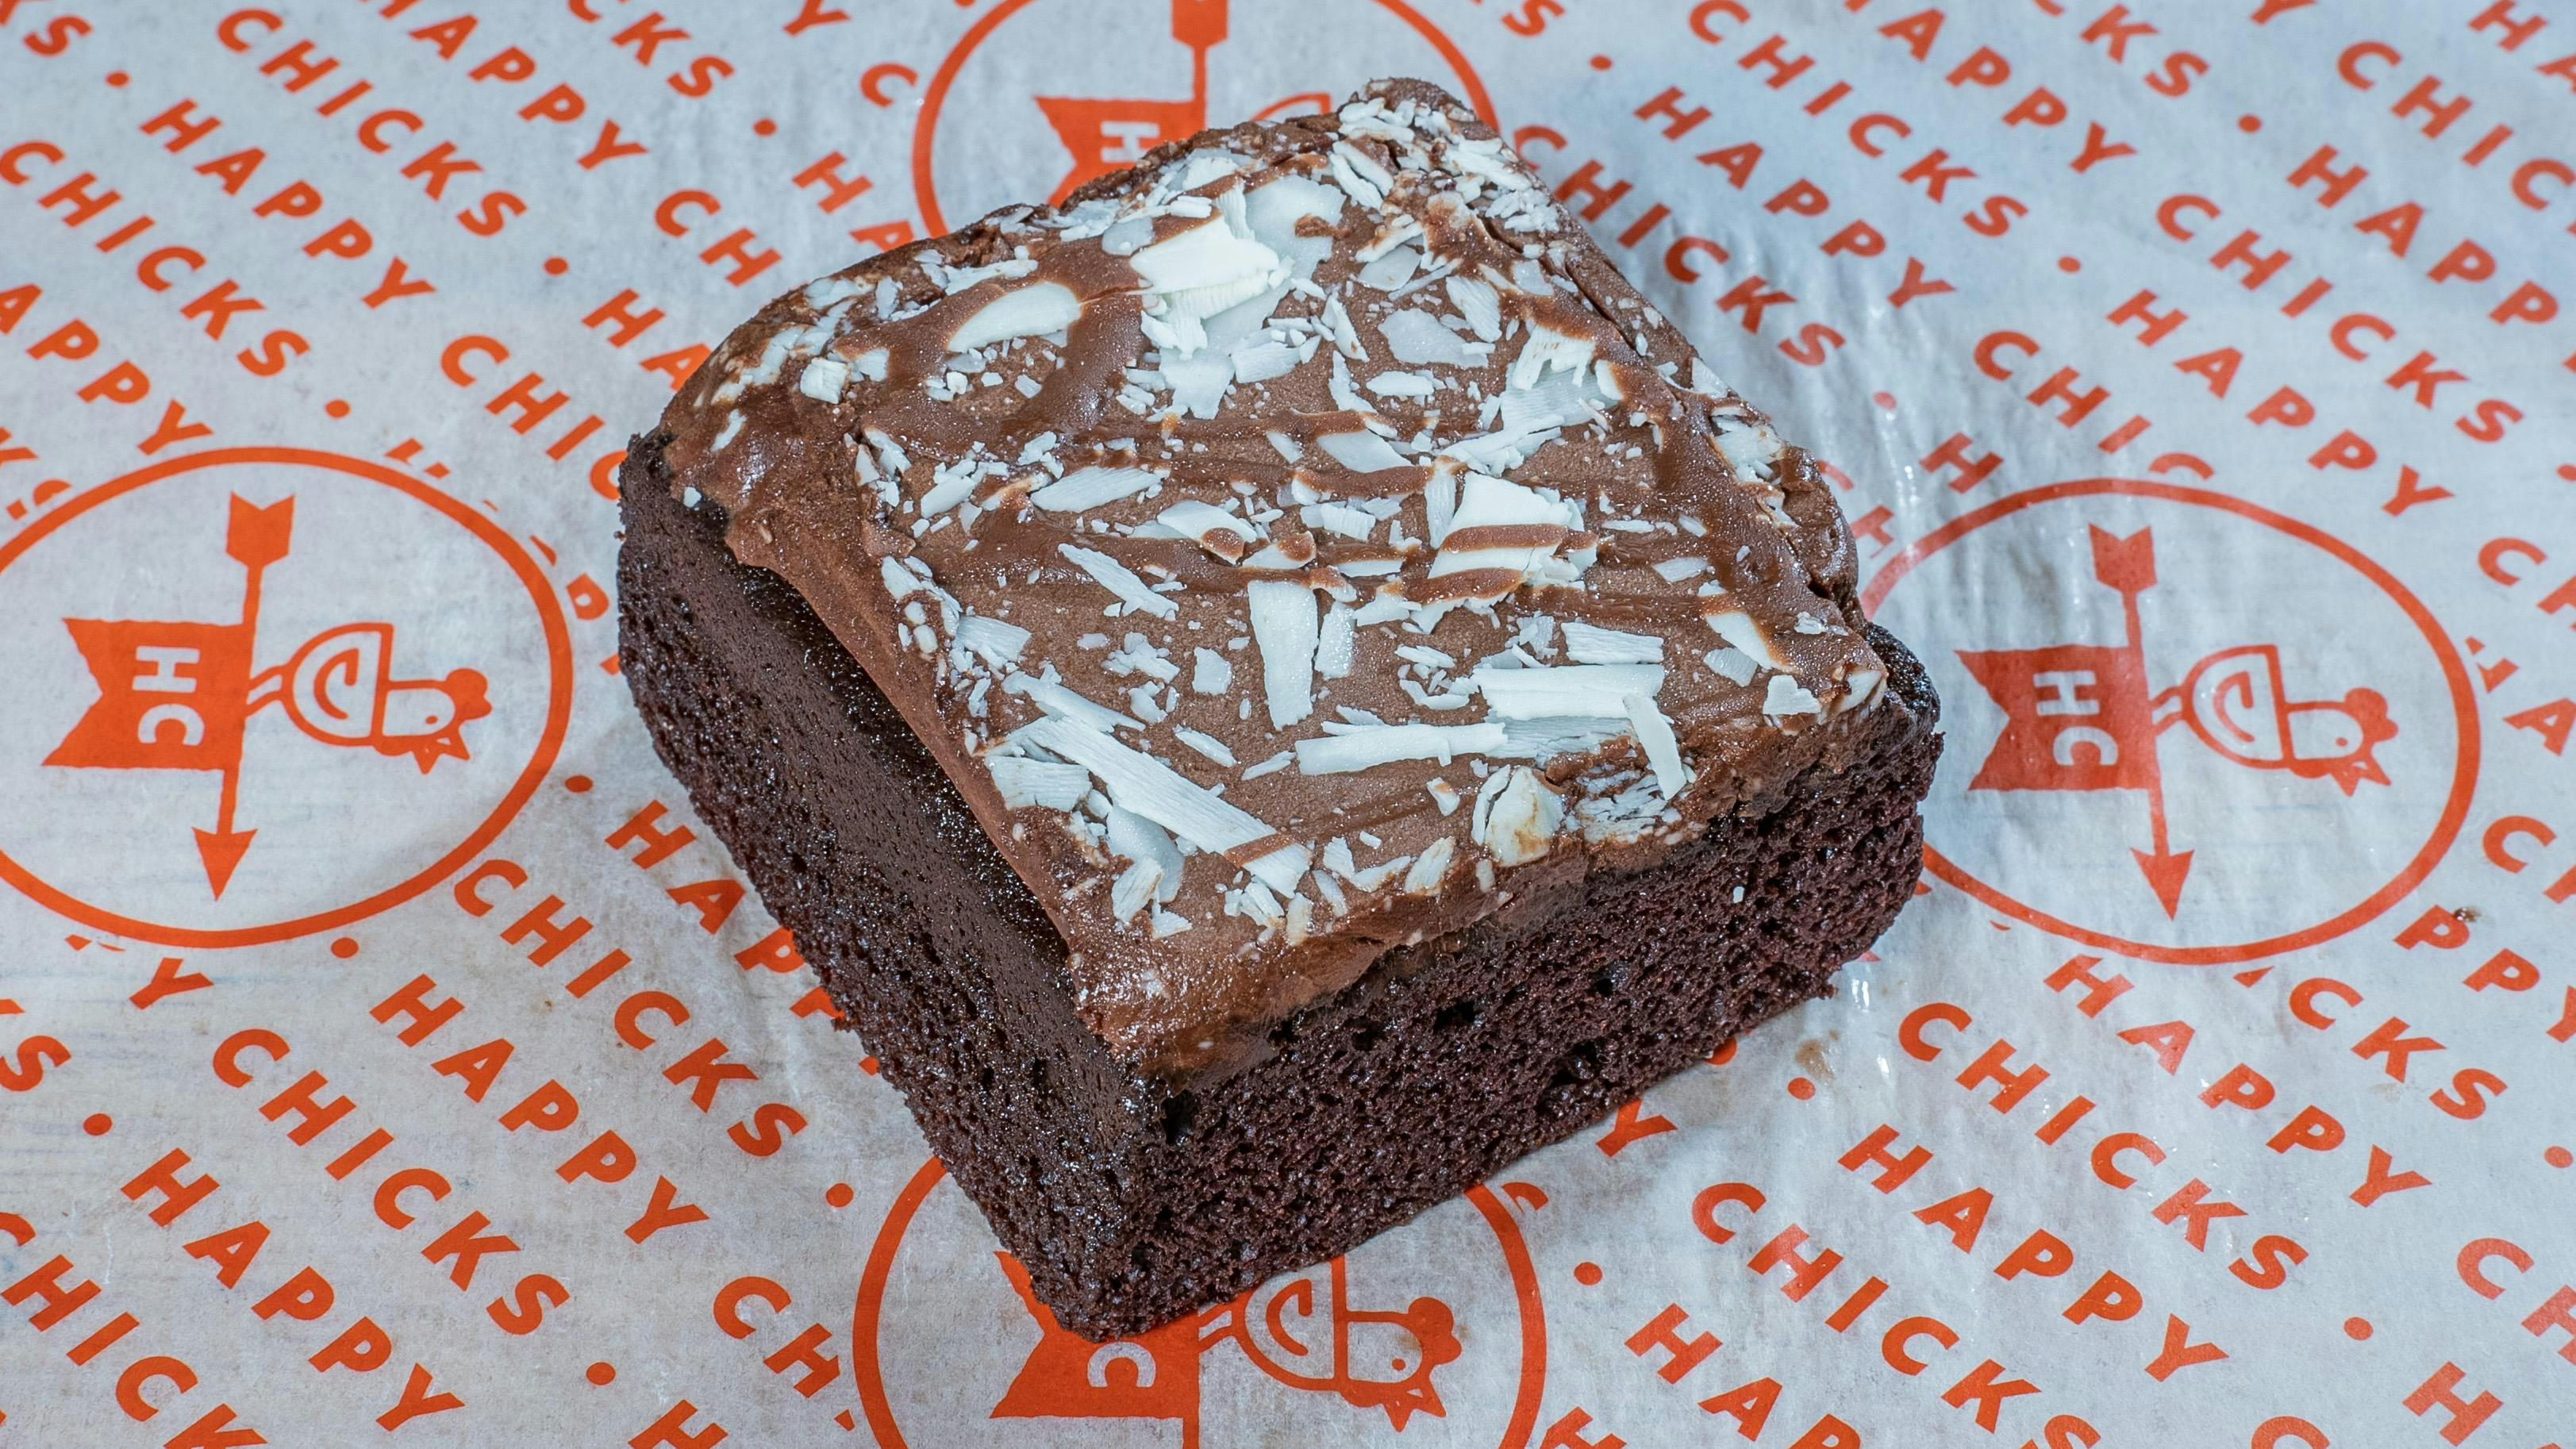 Chocolate Cake from Happy Chicks - Research Blvd in Austin, TX